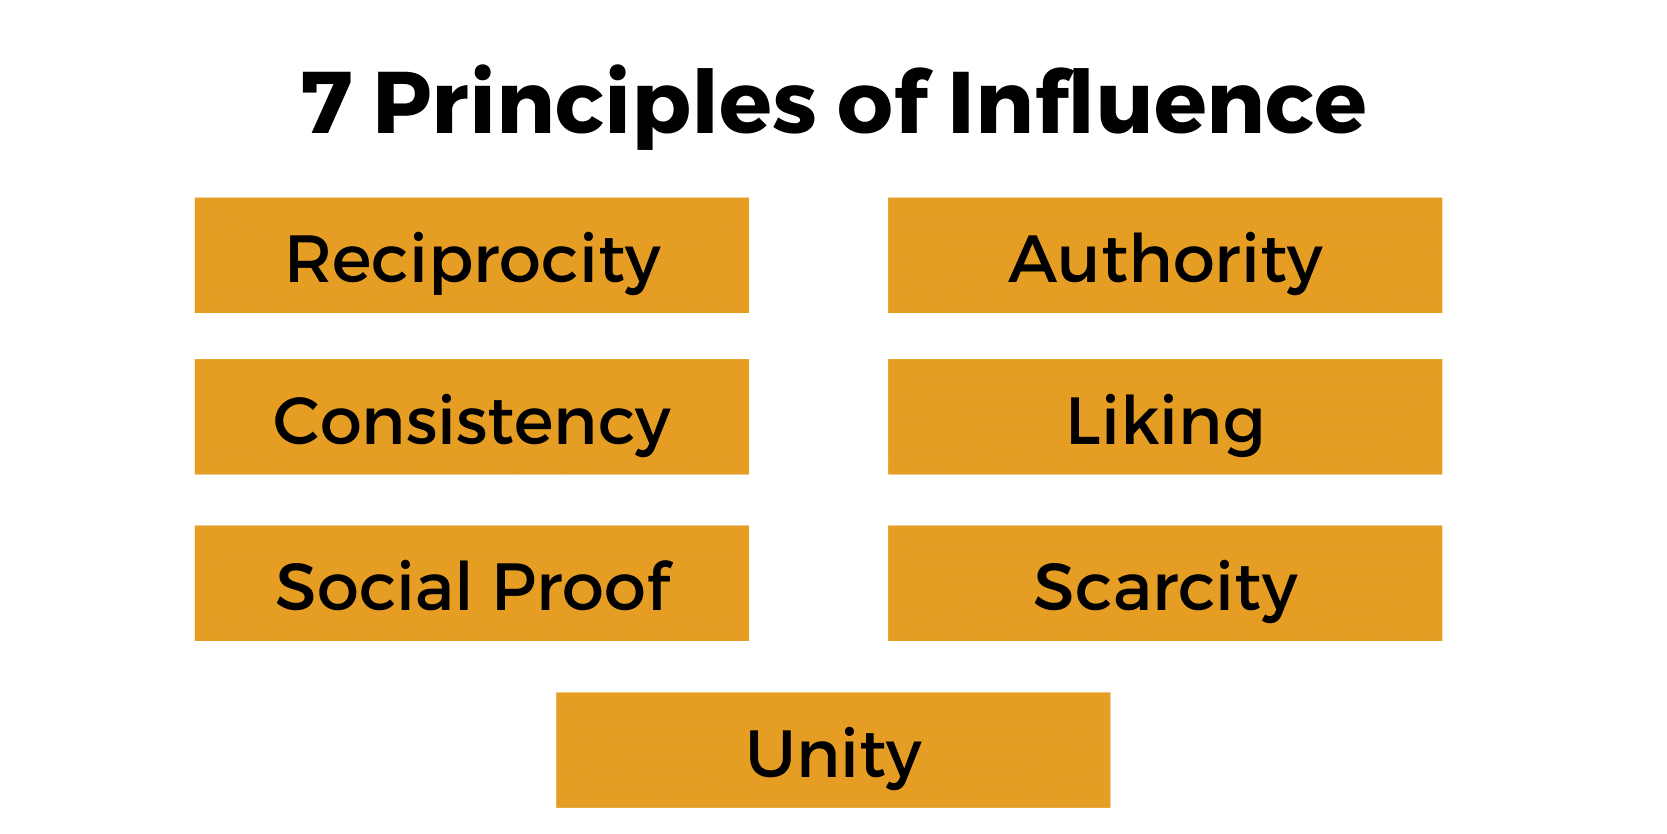 fear-based cybersecurity content marketing 7 principles of influence robert cialdini